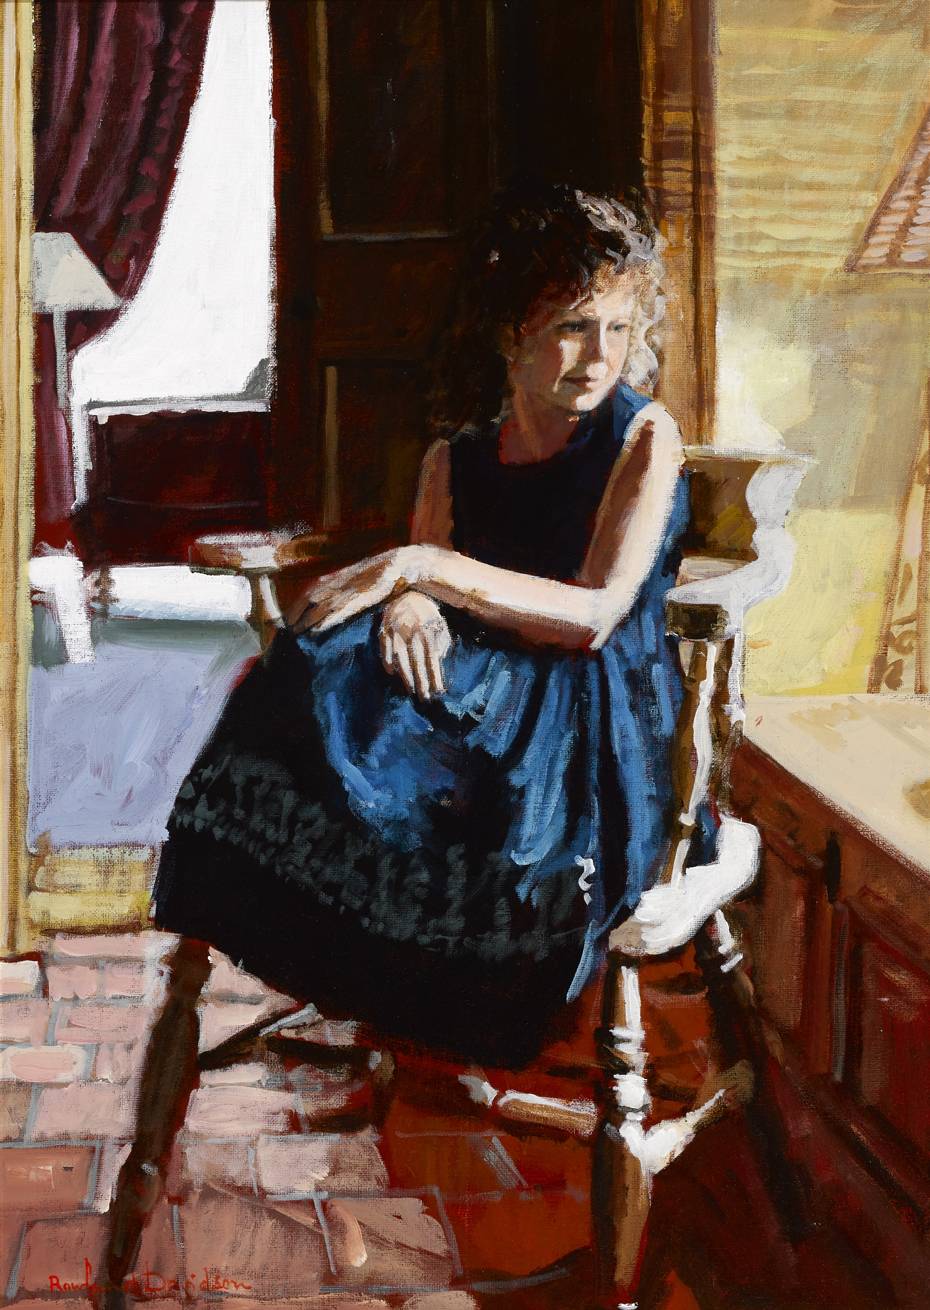 GIRL IN A BLUE DRESS by Rowland Davidson (b.1942) at Whyte's Auctions